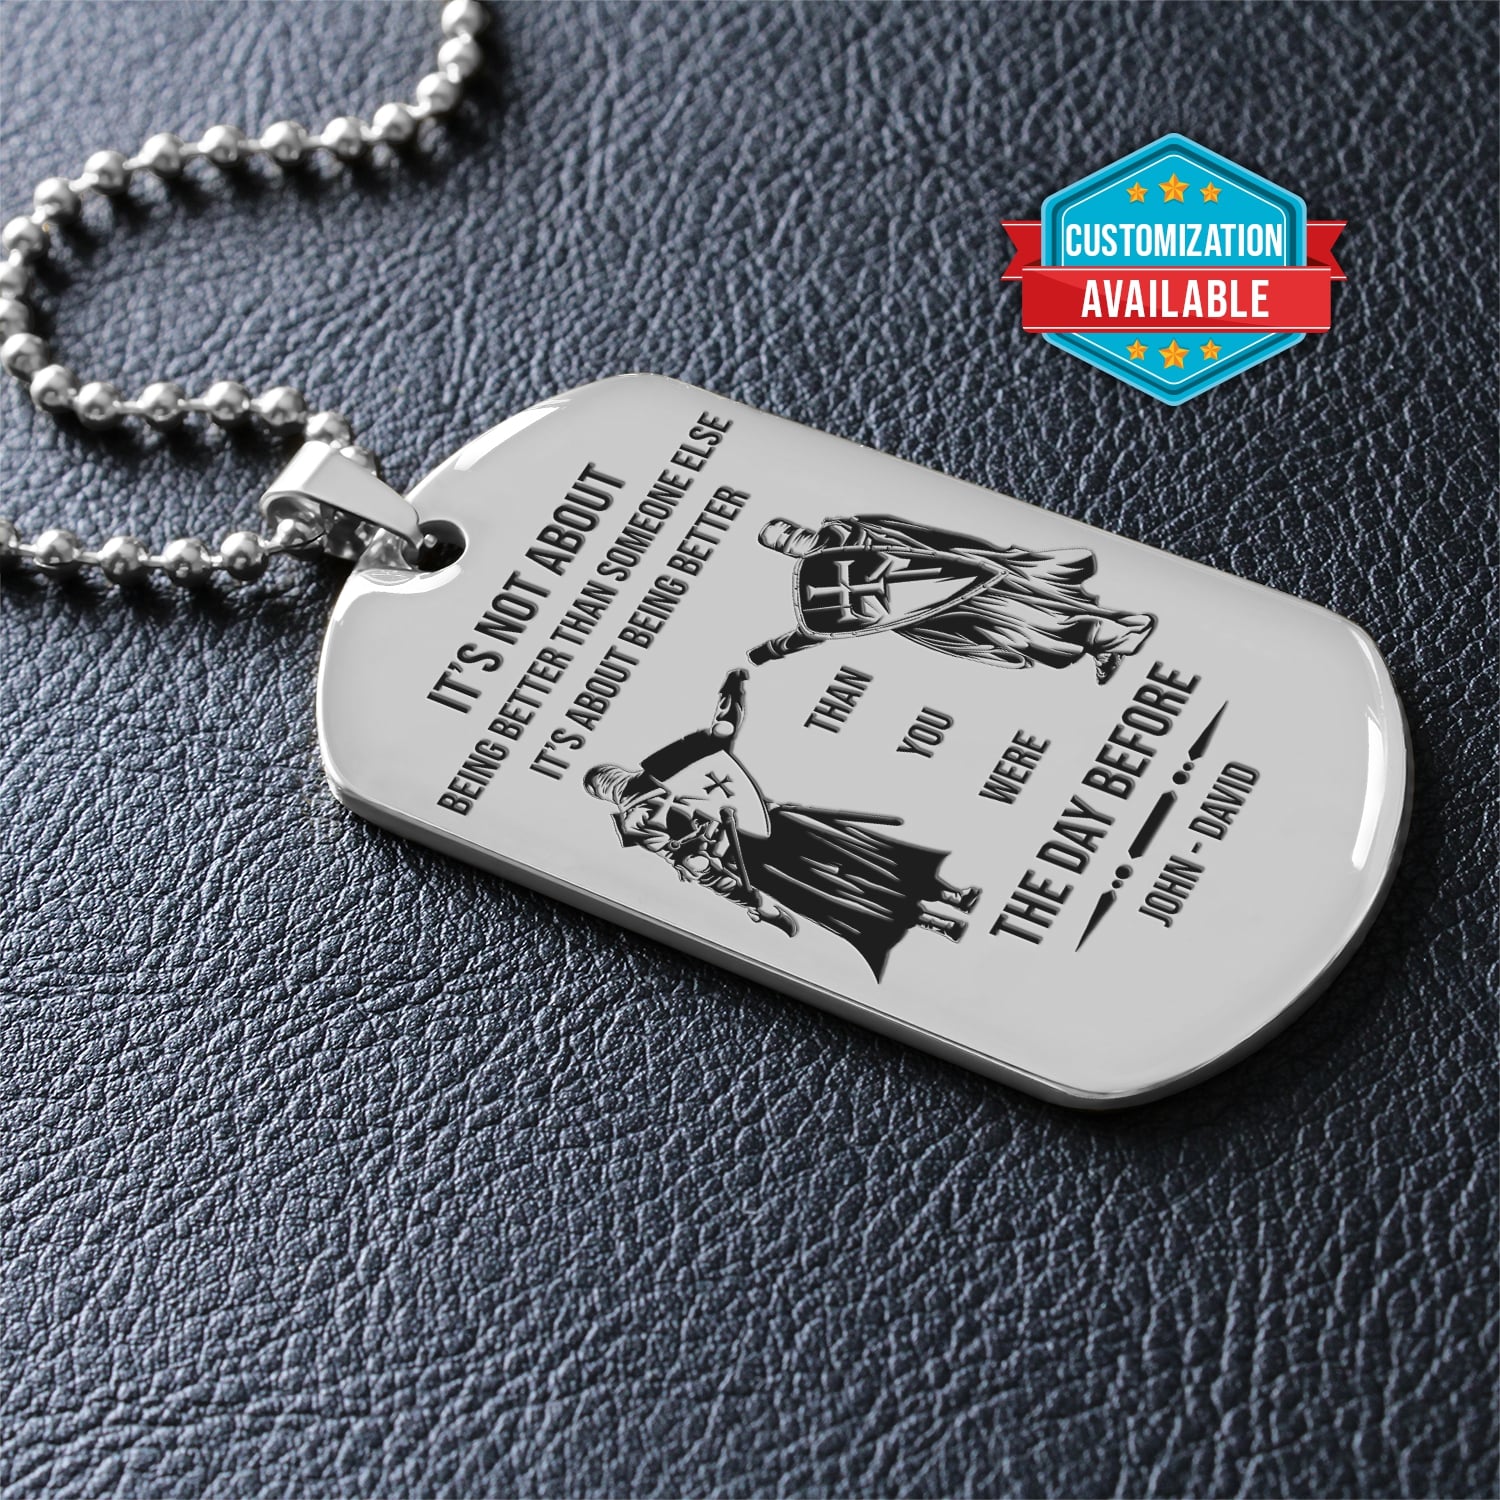 KTD030 - Call On Me Brother - It's About Being Better Than You Were The Day Before - Knights Templar - Silver Double-Sided Dog Tag